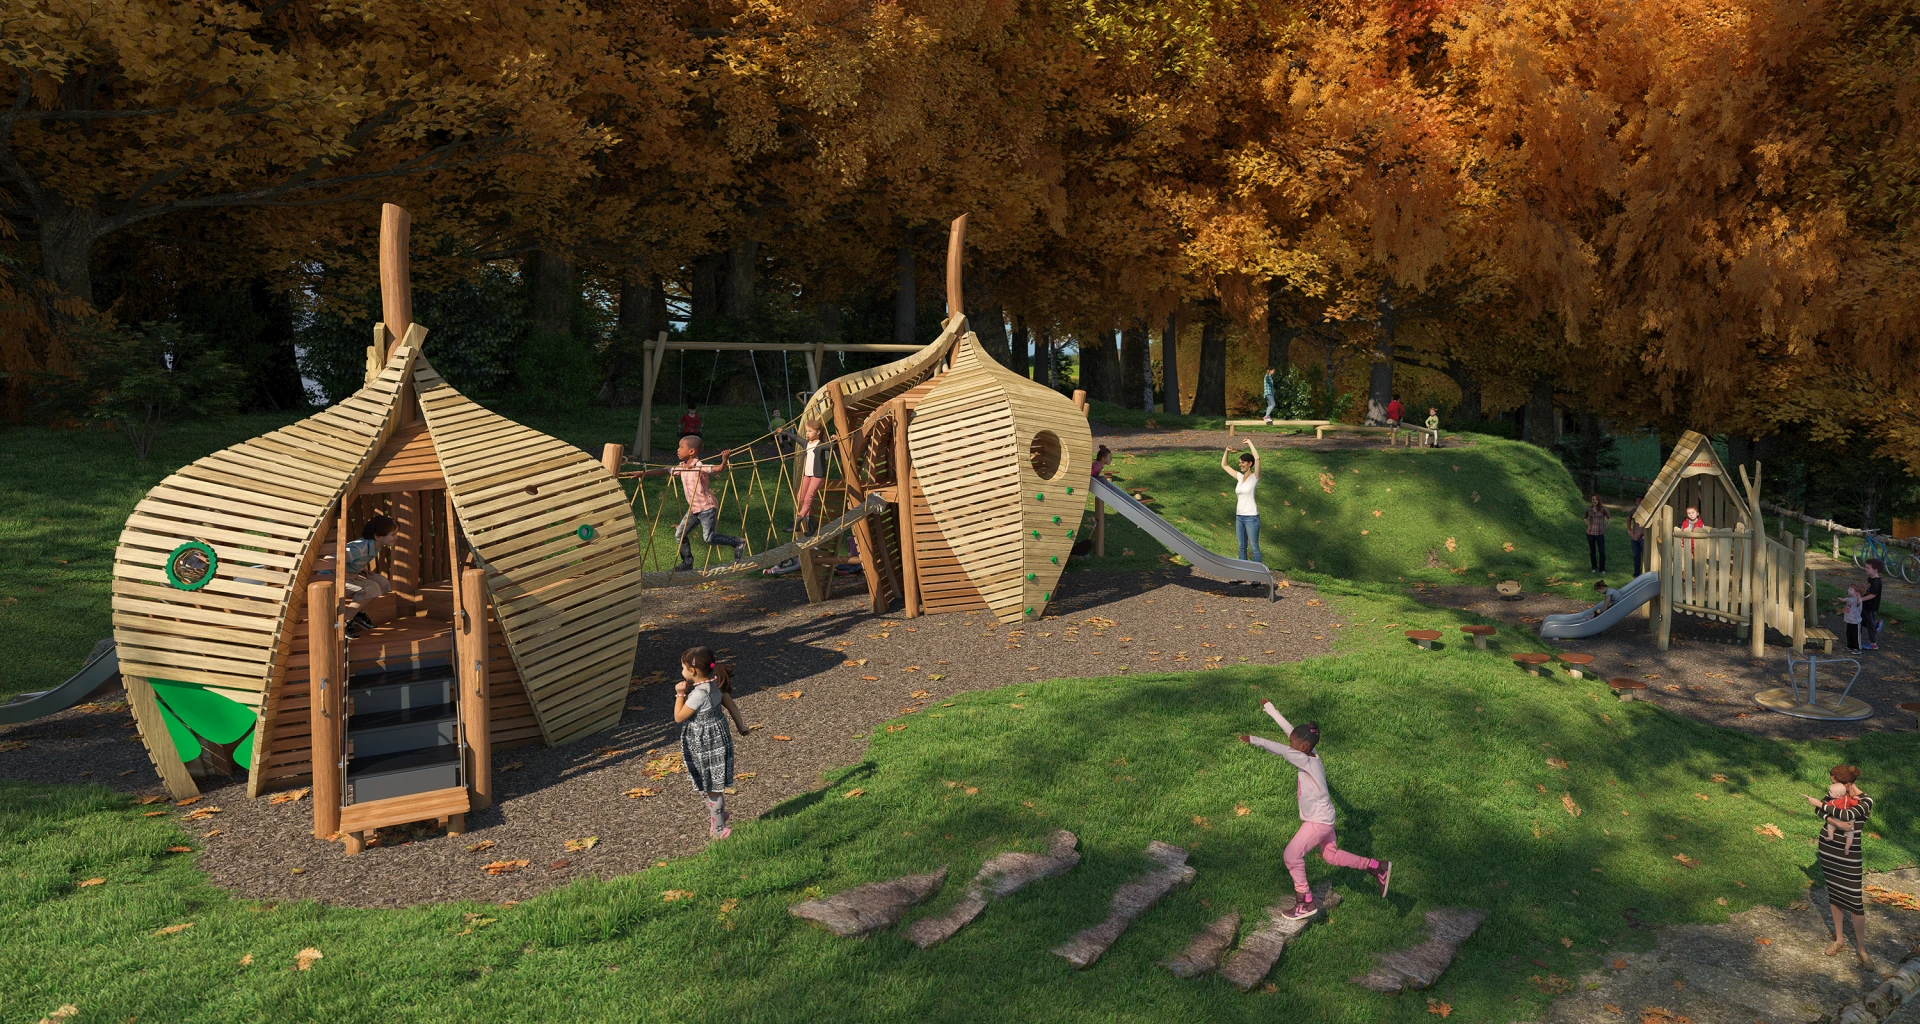 Concept design for a natural wooden playground - The Chestnuts